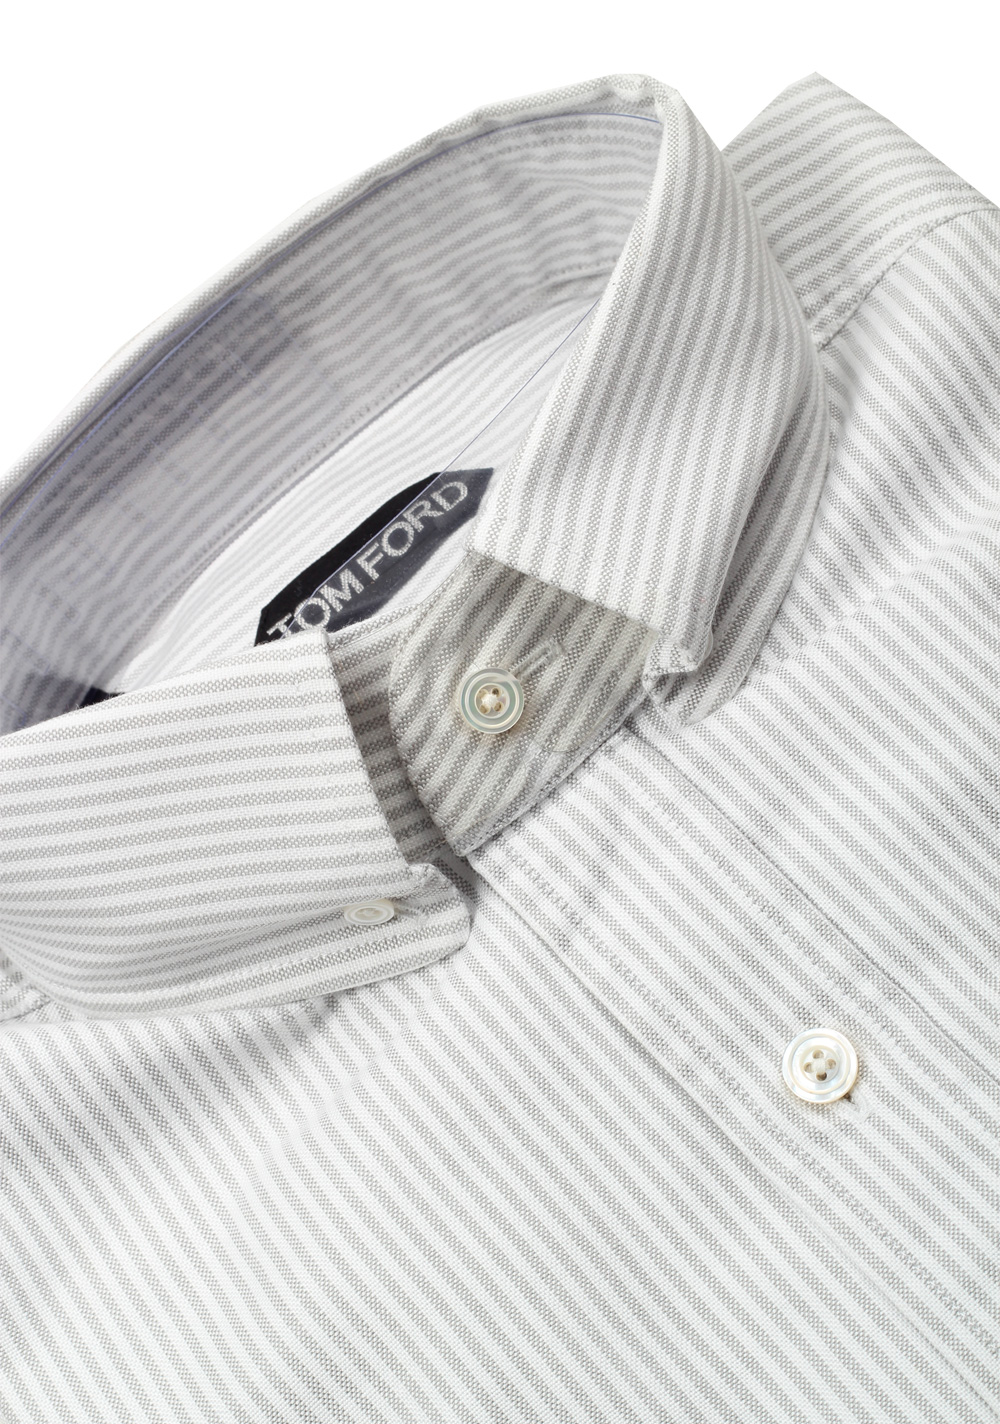 TOM FORD Striped White Gray Button Down Casual Shirt Size 40 / 15,75 U.S. | Costume Limité